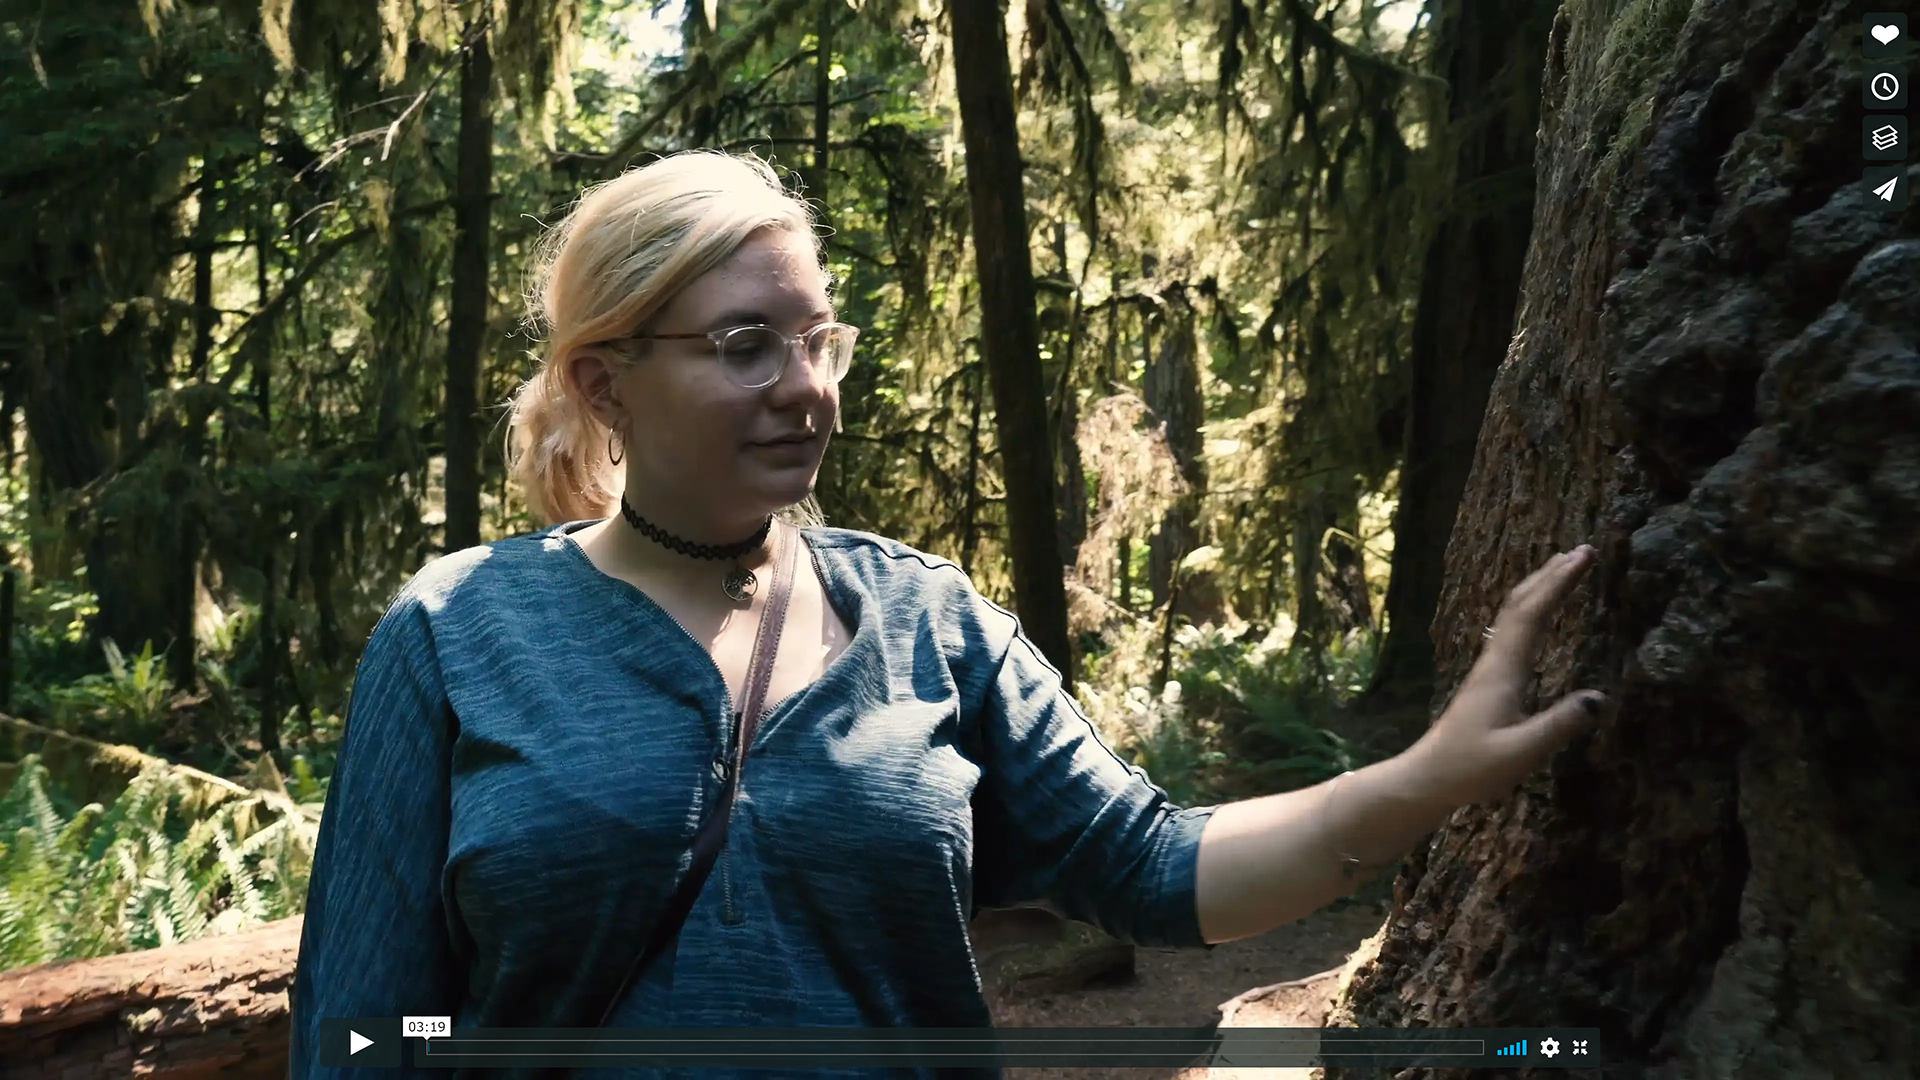 Photograph of a person with long blonde hair, wearing clear rimmed glasses, a blue t-shirt, and a black choker necklace. Their hand is stretched out, resting on a tree trunk. In the background is a green forest at midday and the sun is shining on the right half of the persons figure.